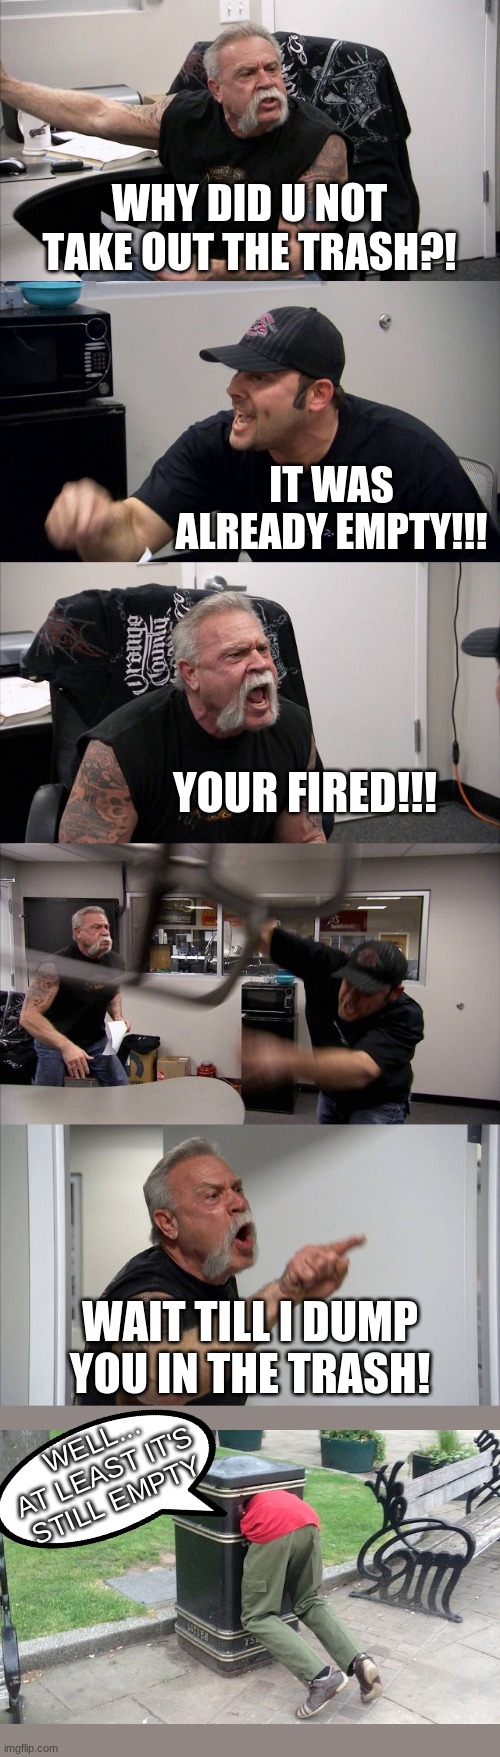 Trashy talky | WHY DID U NOT TAKE OUT THE TRASH?! IT WAS ALREADY EMPTY!!! YOUR FIRED!!! WAIT TILL I DUMP YOU IN THE TRASH! WELL... AT LEAST IT'S STILL EMPTY | image tagged in memes,american chopper argument | made w/ Imgflip meme maker